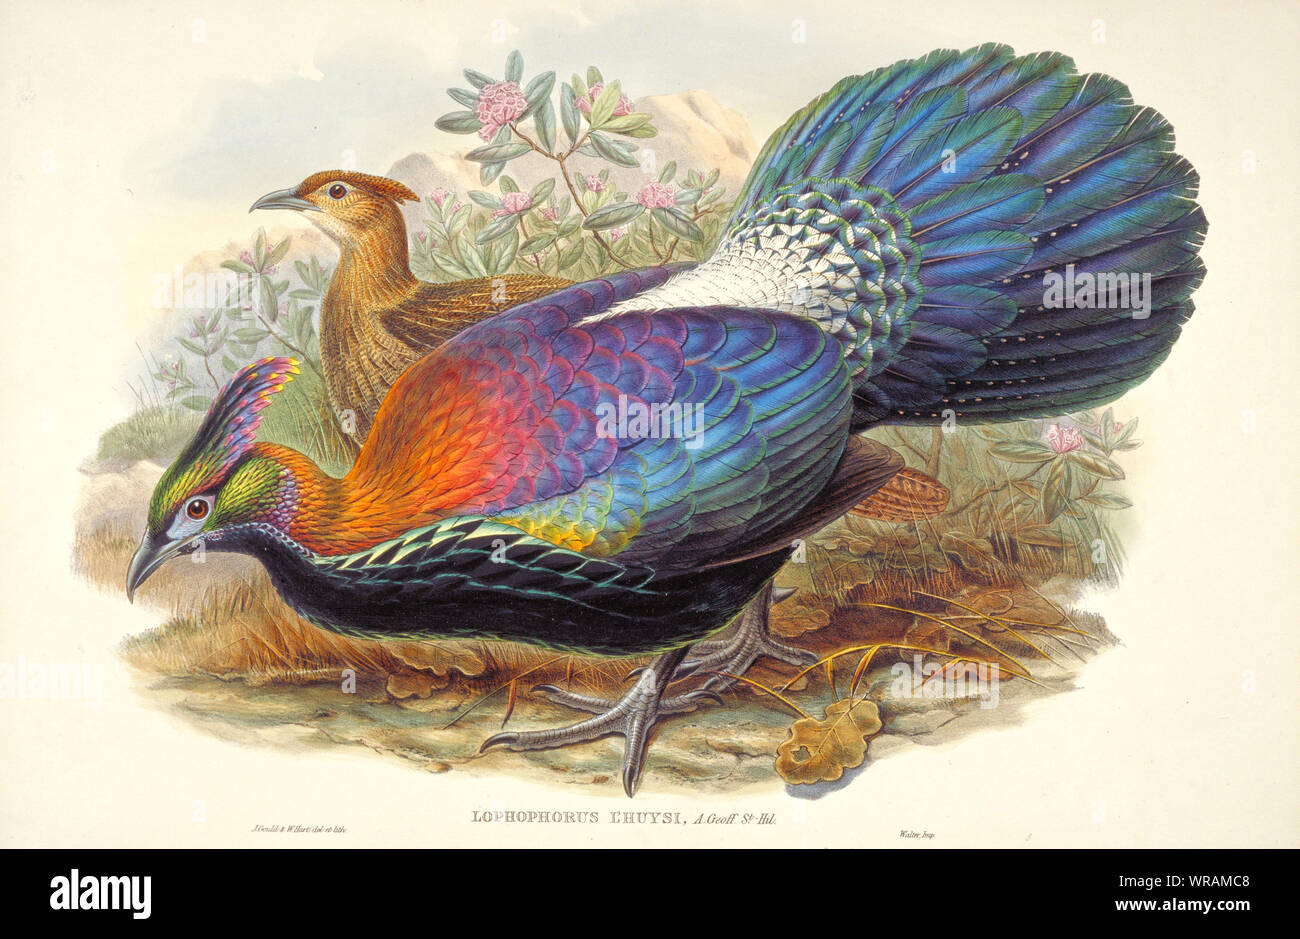 The Chinese monal (Lophophorus lhuysii), colored lithograph from 'The Birds of Asia' that published in the 19th century. Sketch by John Gould. Stock Photo